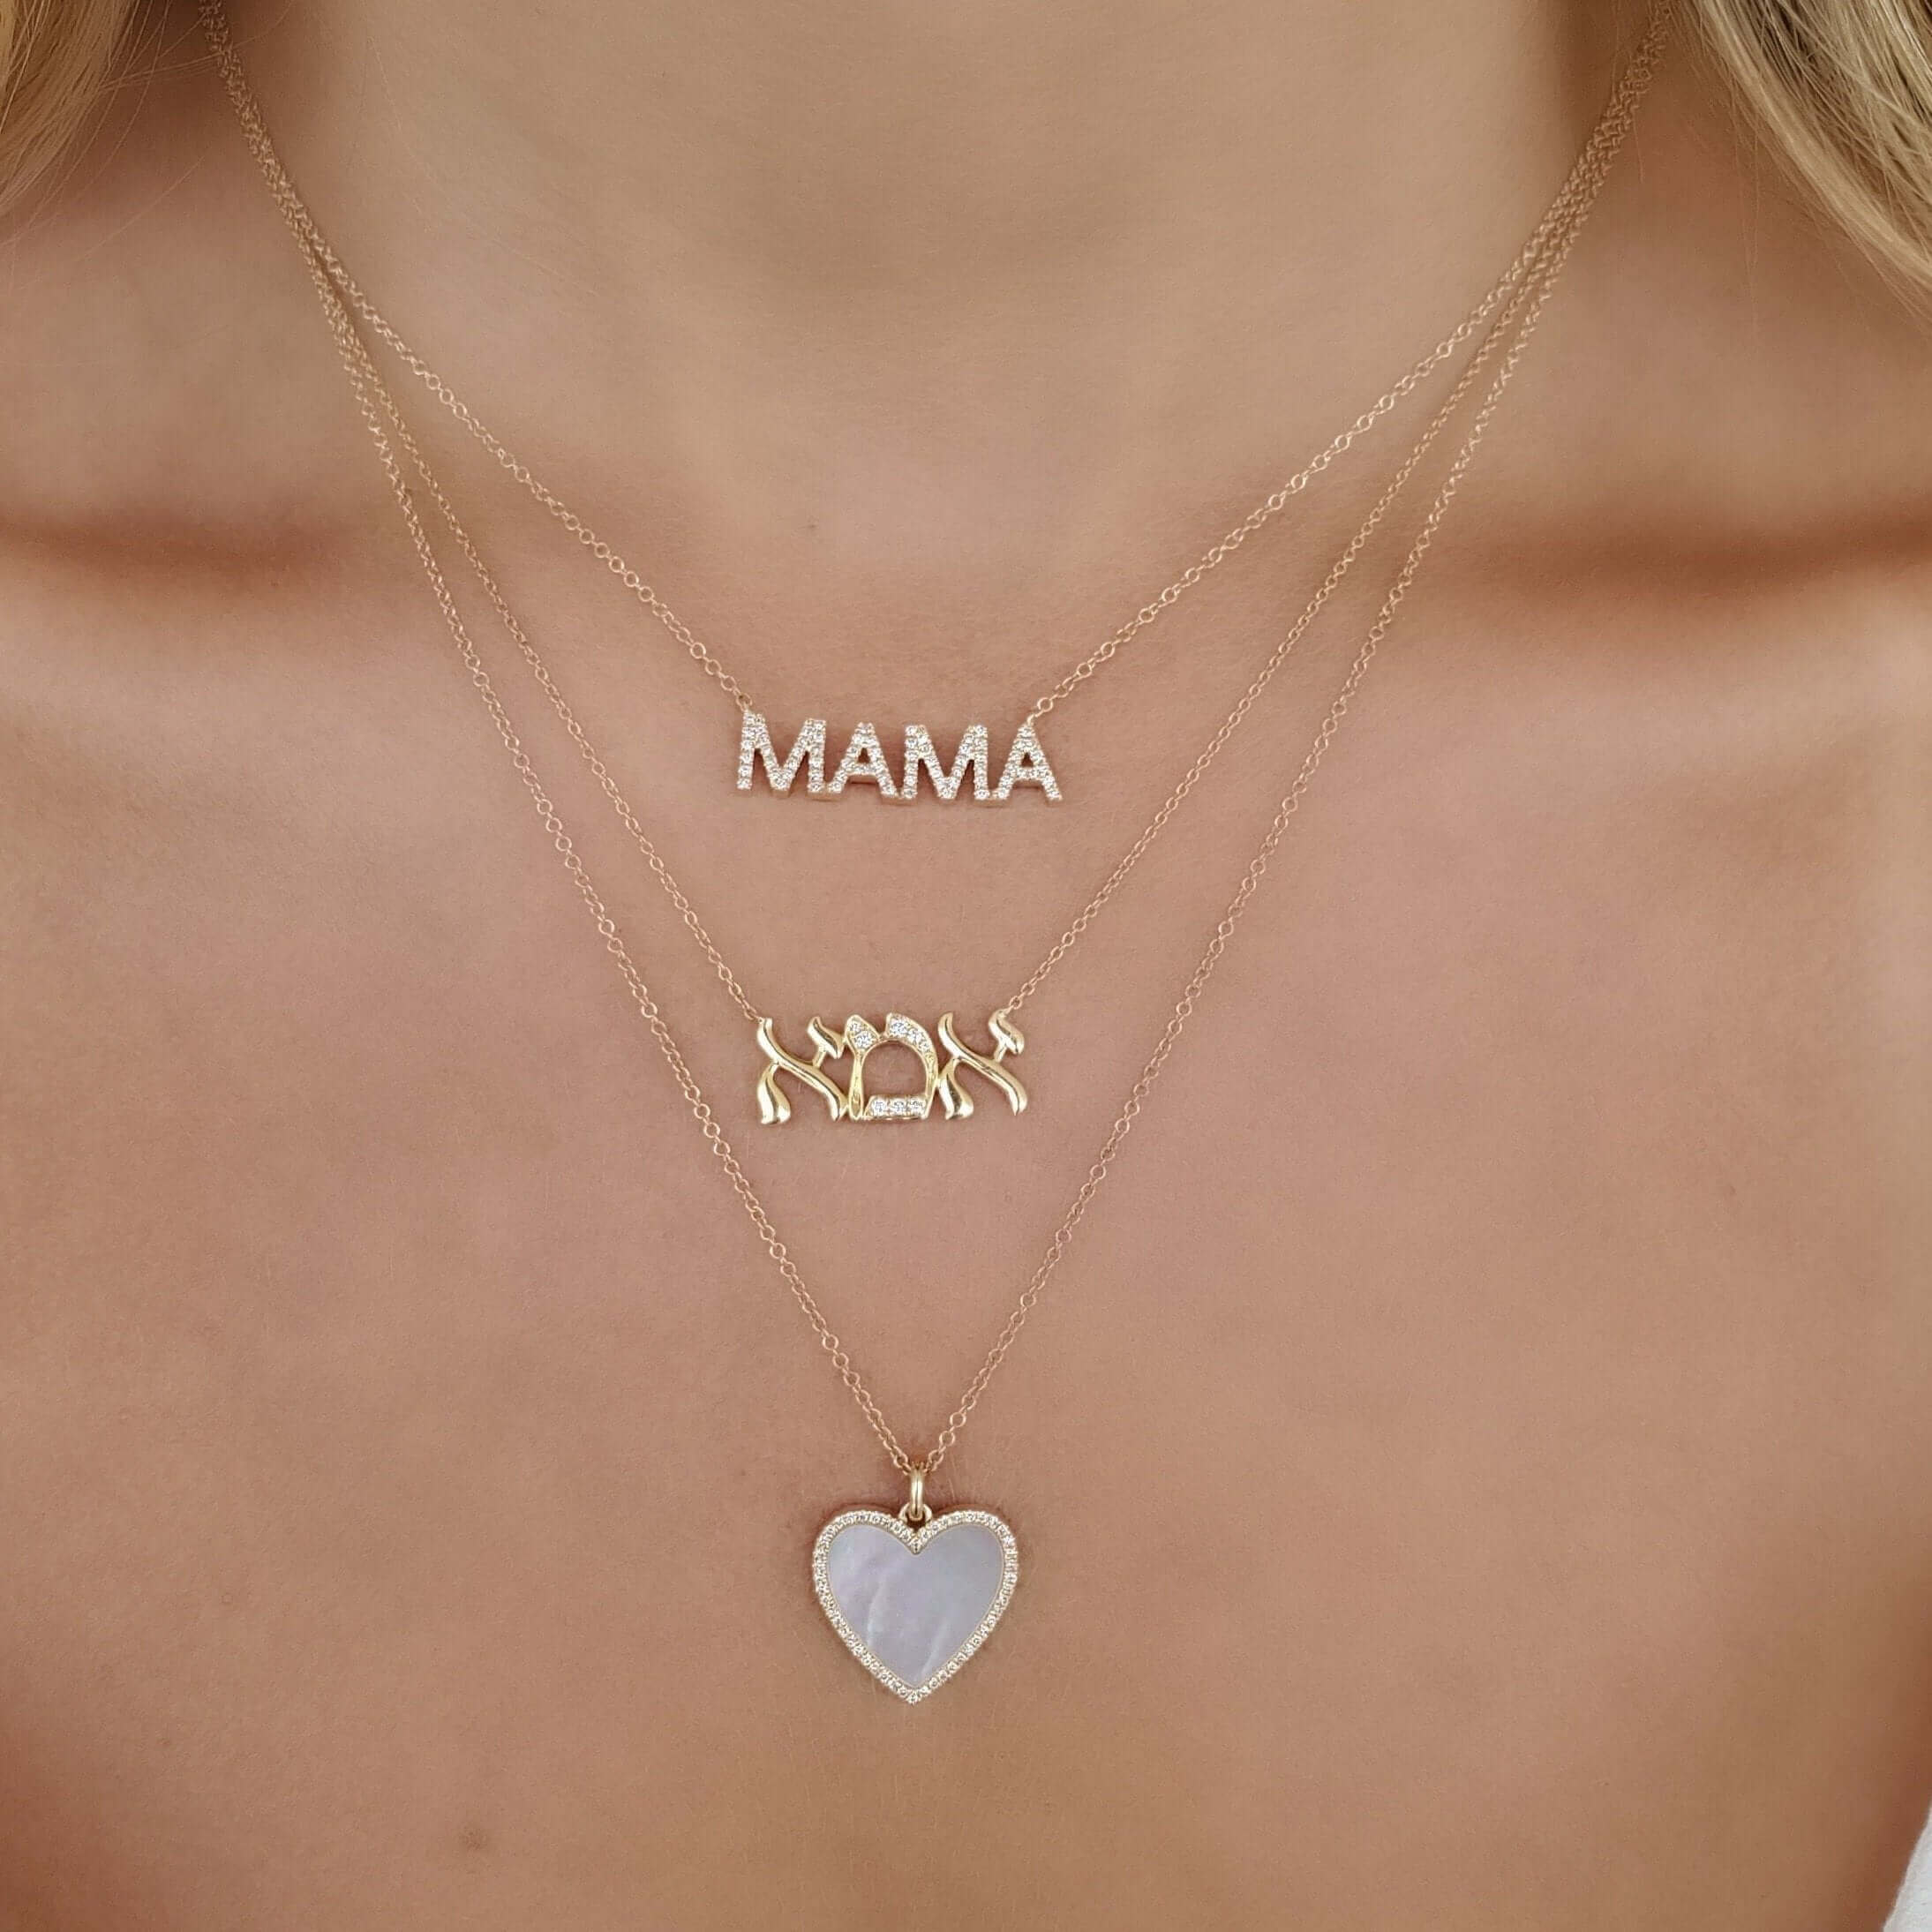 Mama Necklace, Mommy Nameplate necklace - Urban Carats